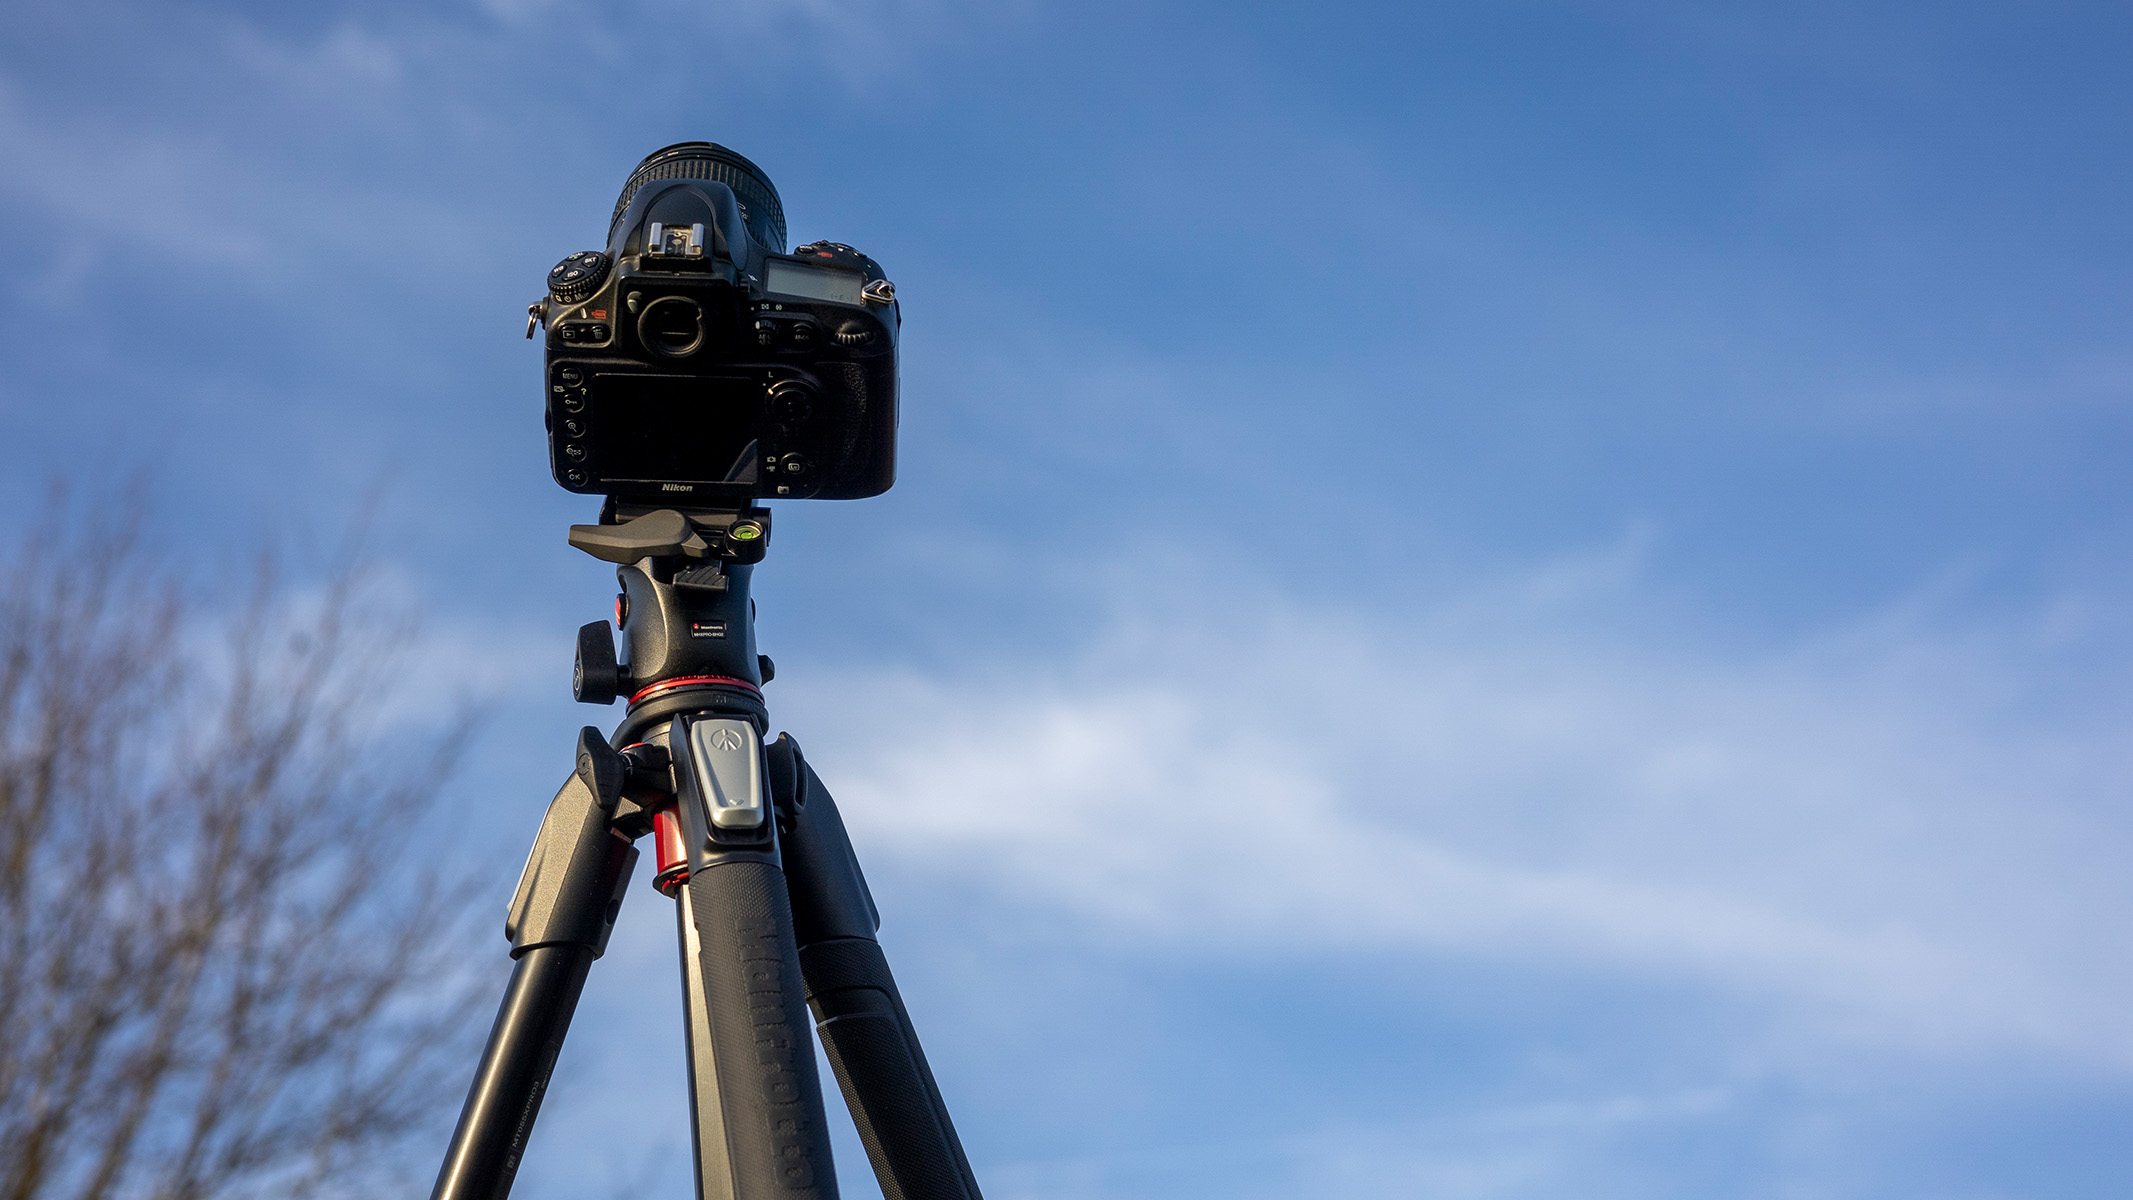 A picture of the Manfrotto tripod with the camera facing the sky